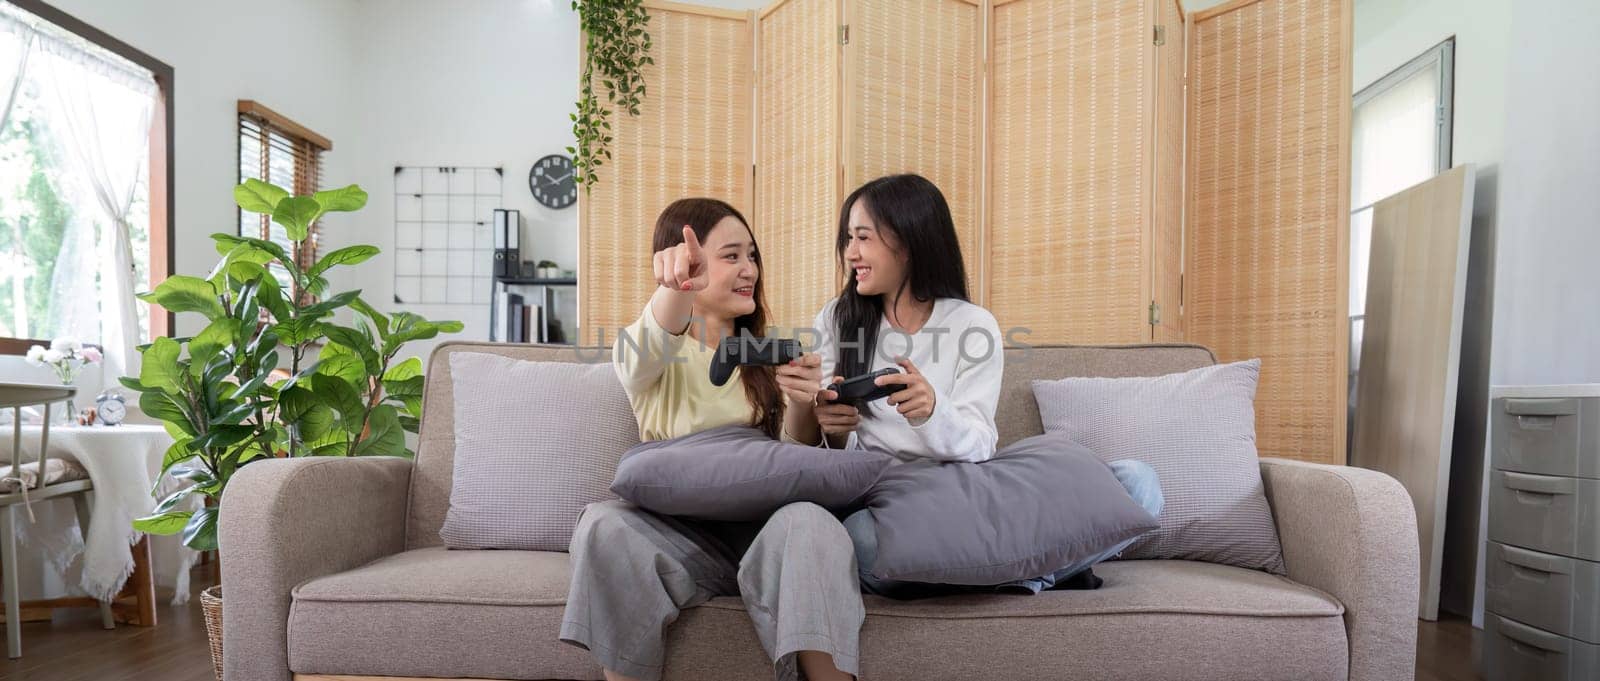 Happy LGBT lesbian couple holding joystick and playing video game in relax day by nateemee